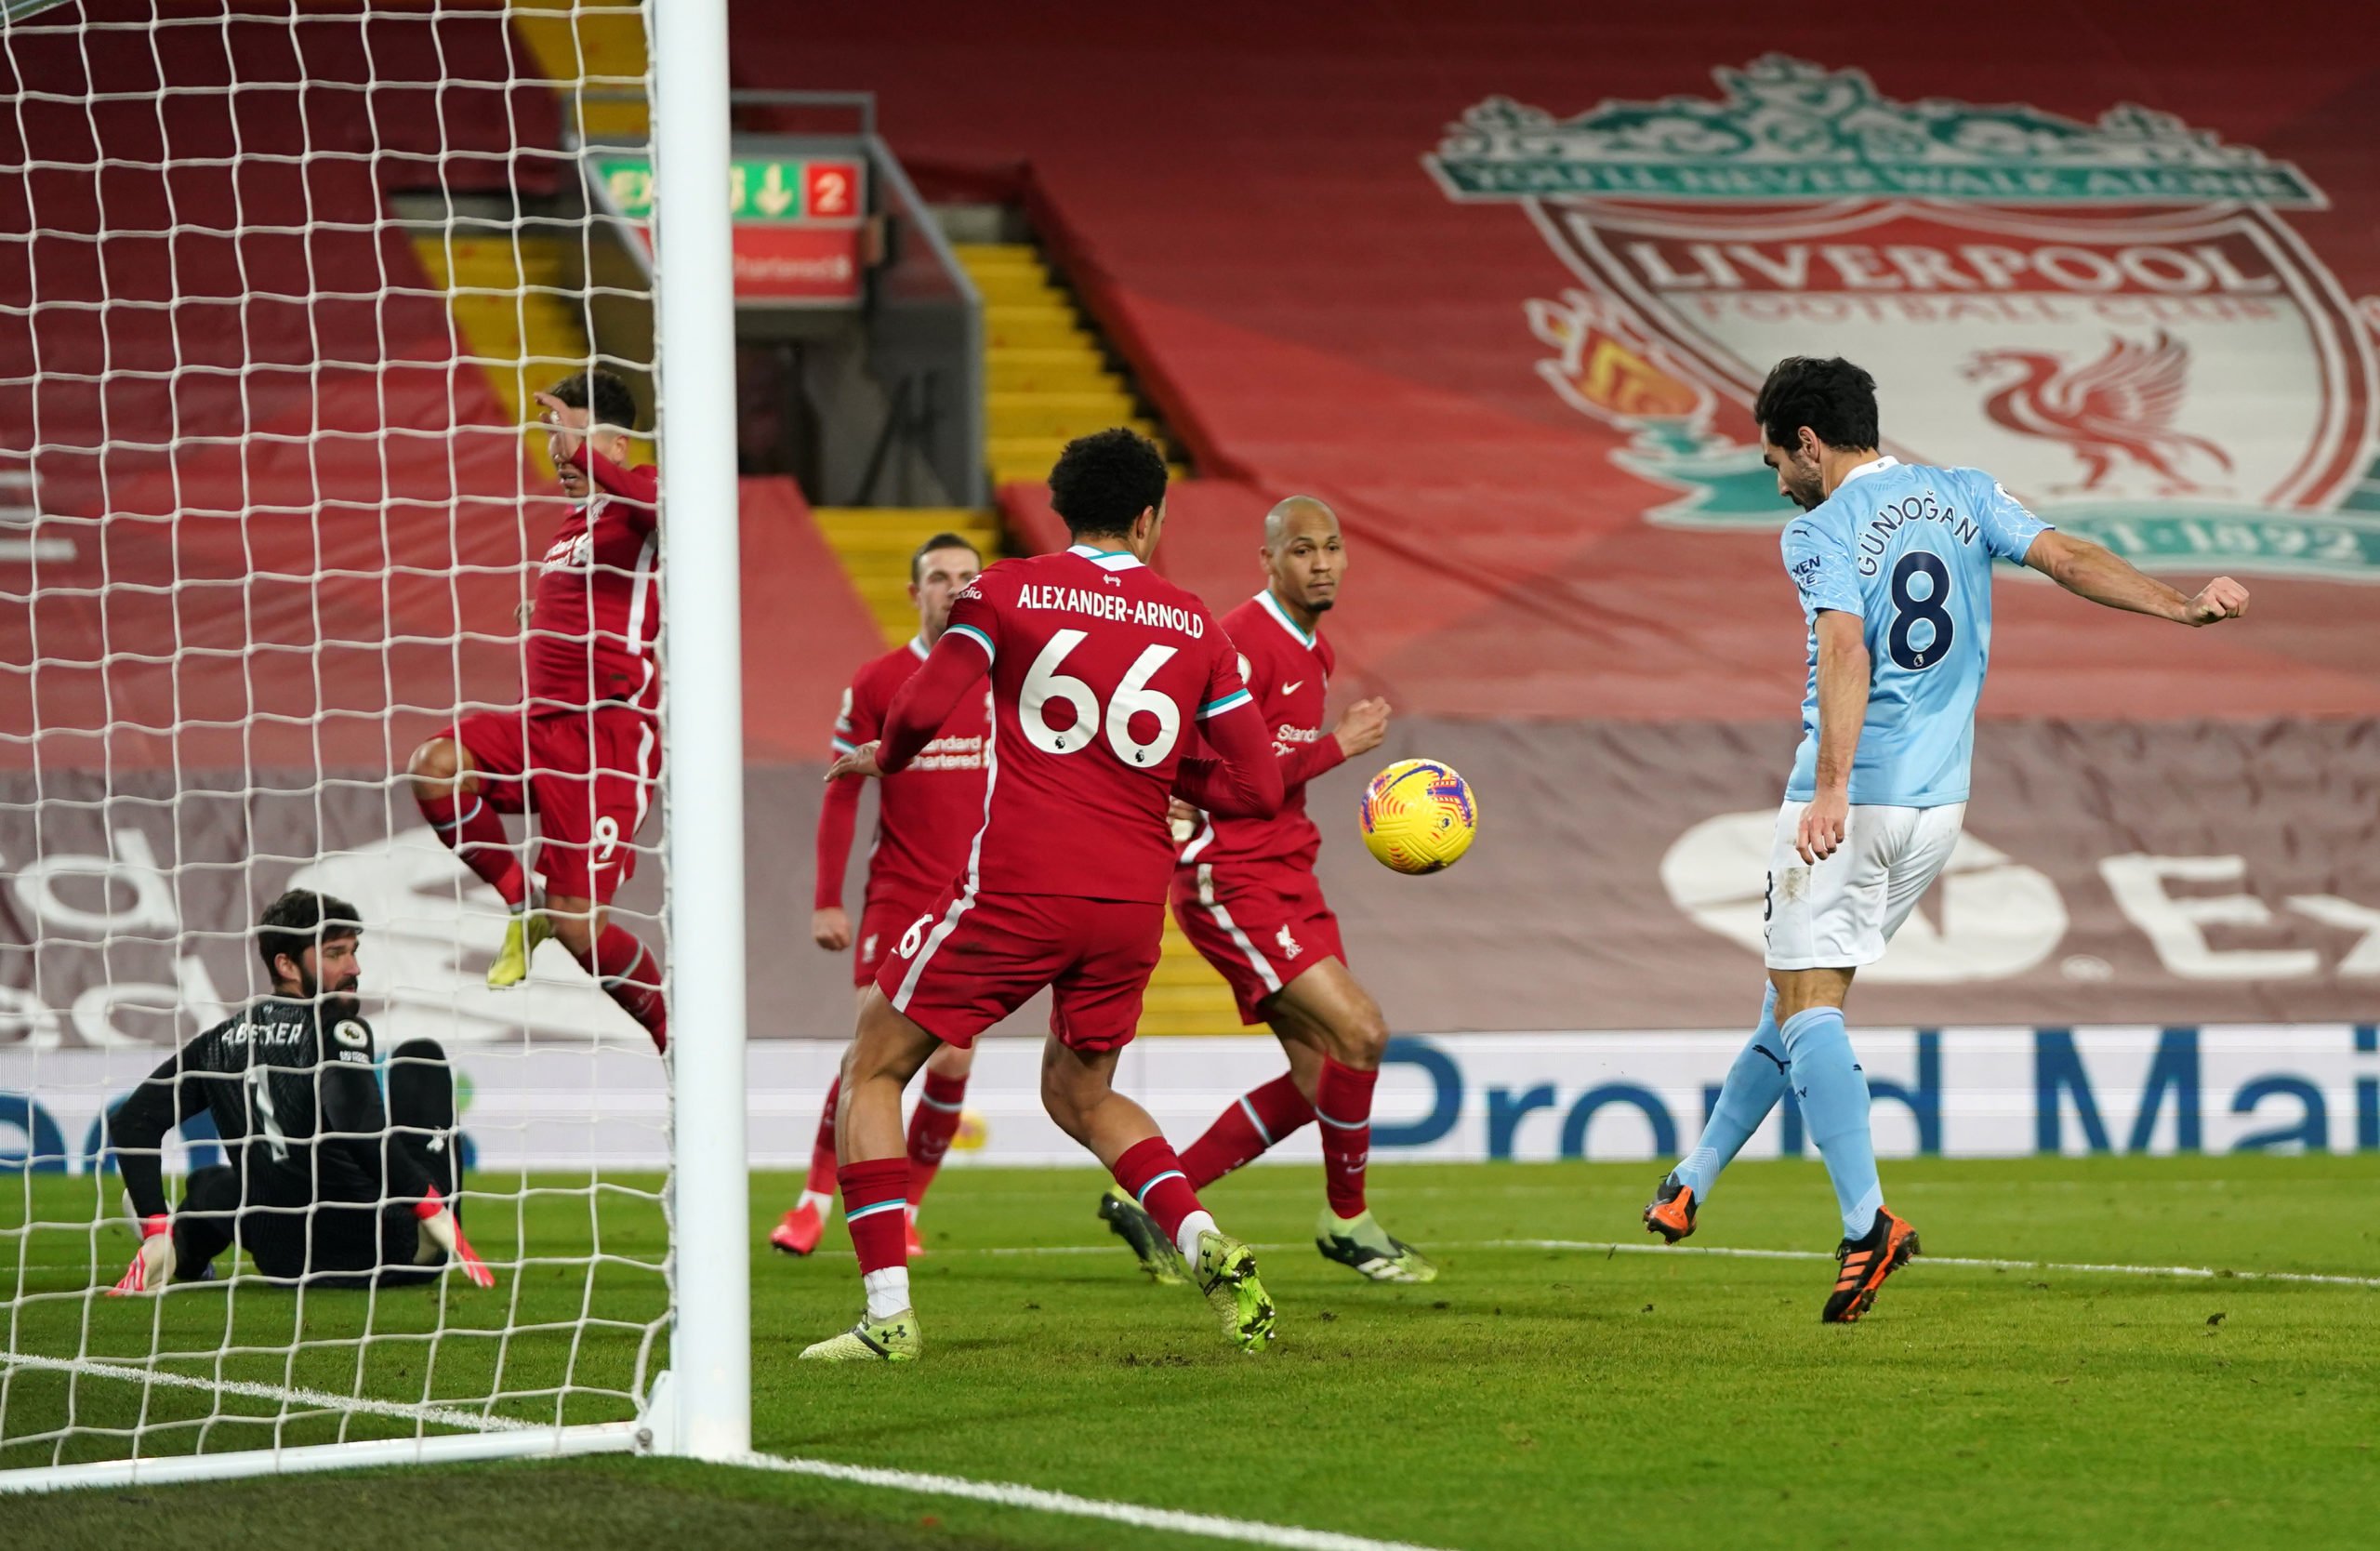 Liverpool Players Rated In Dismal Defeat Vs Manchester City (Liverpool players are in action in the photo)